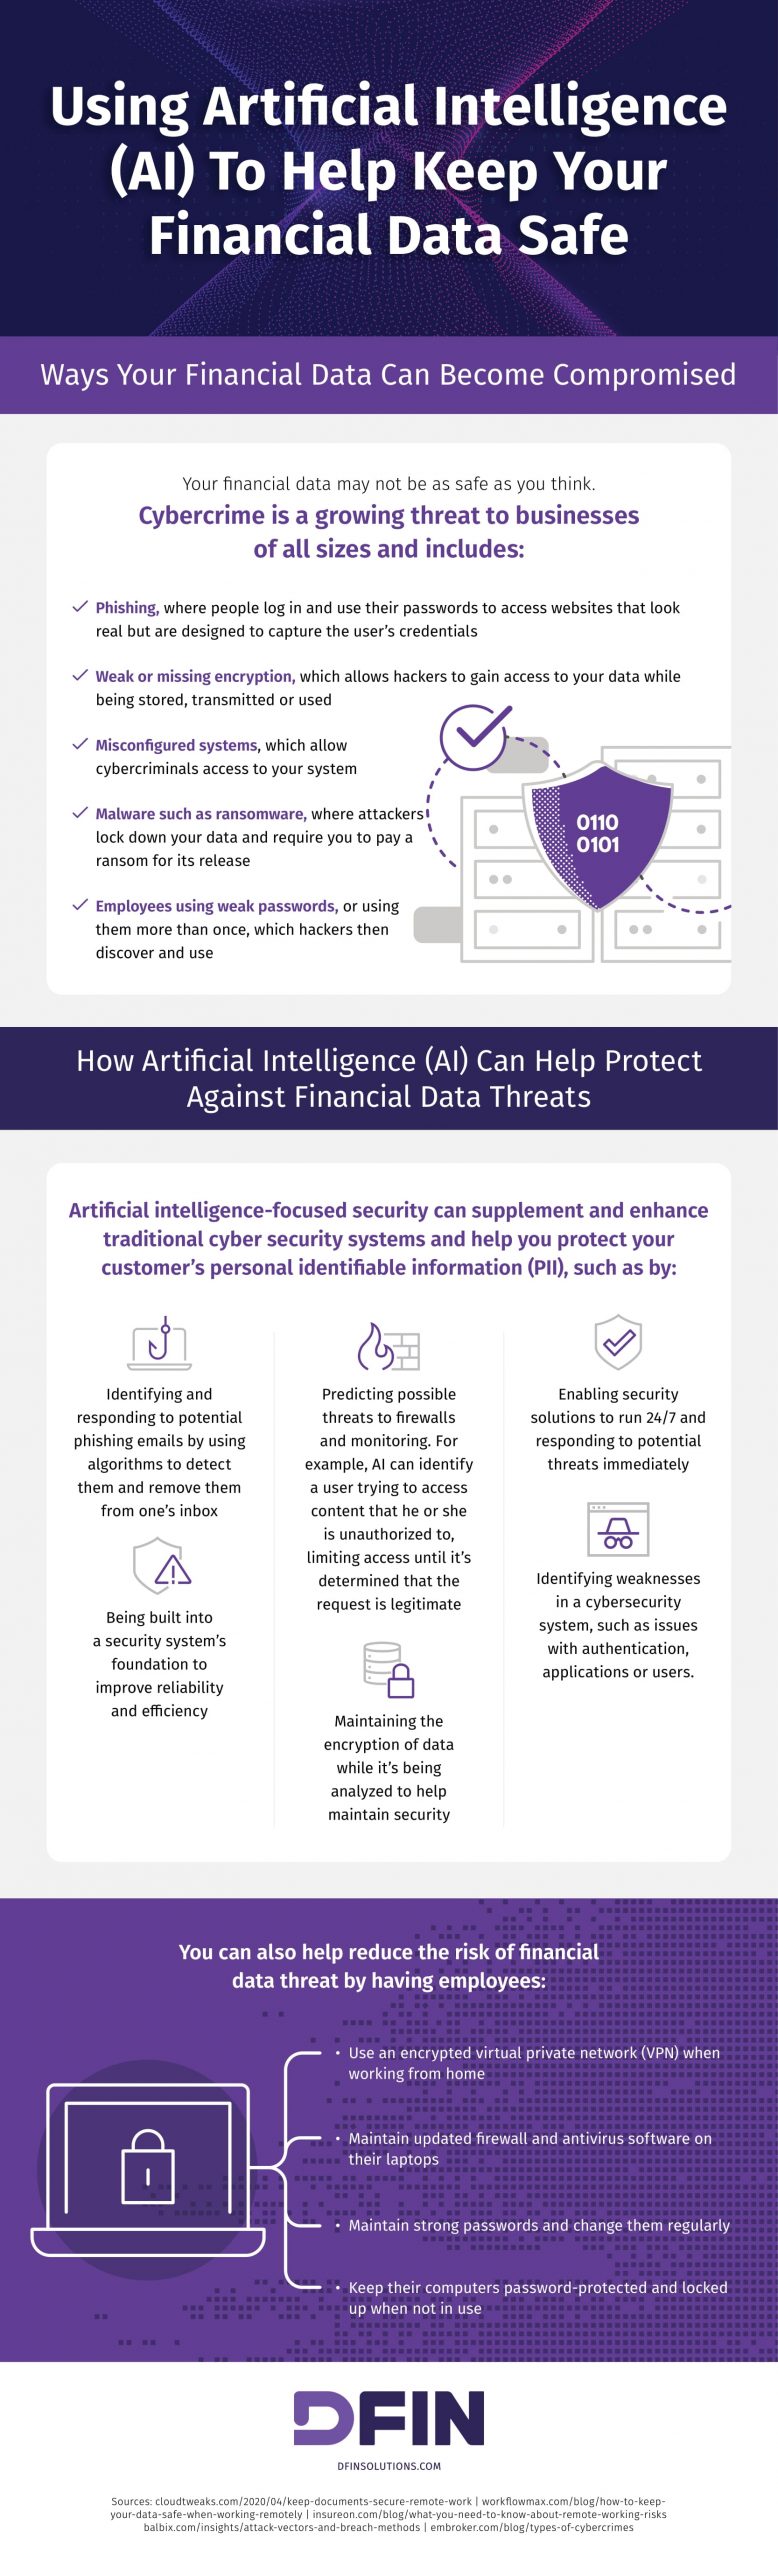 Using AI To Help Keep Your Financial Data Safe